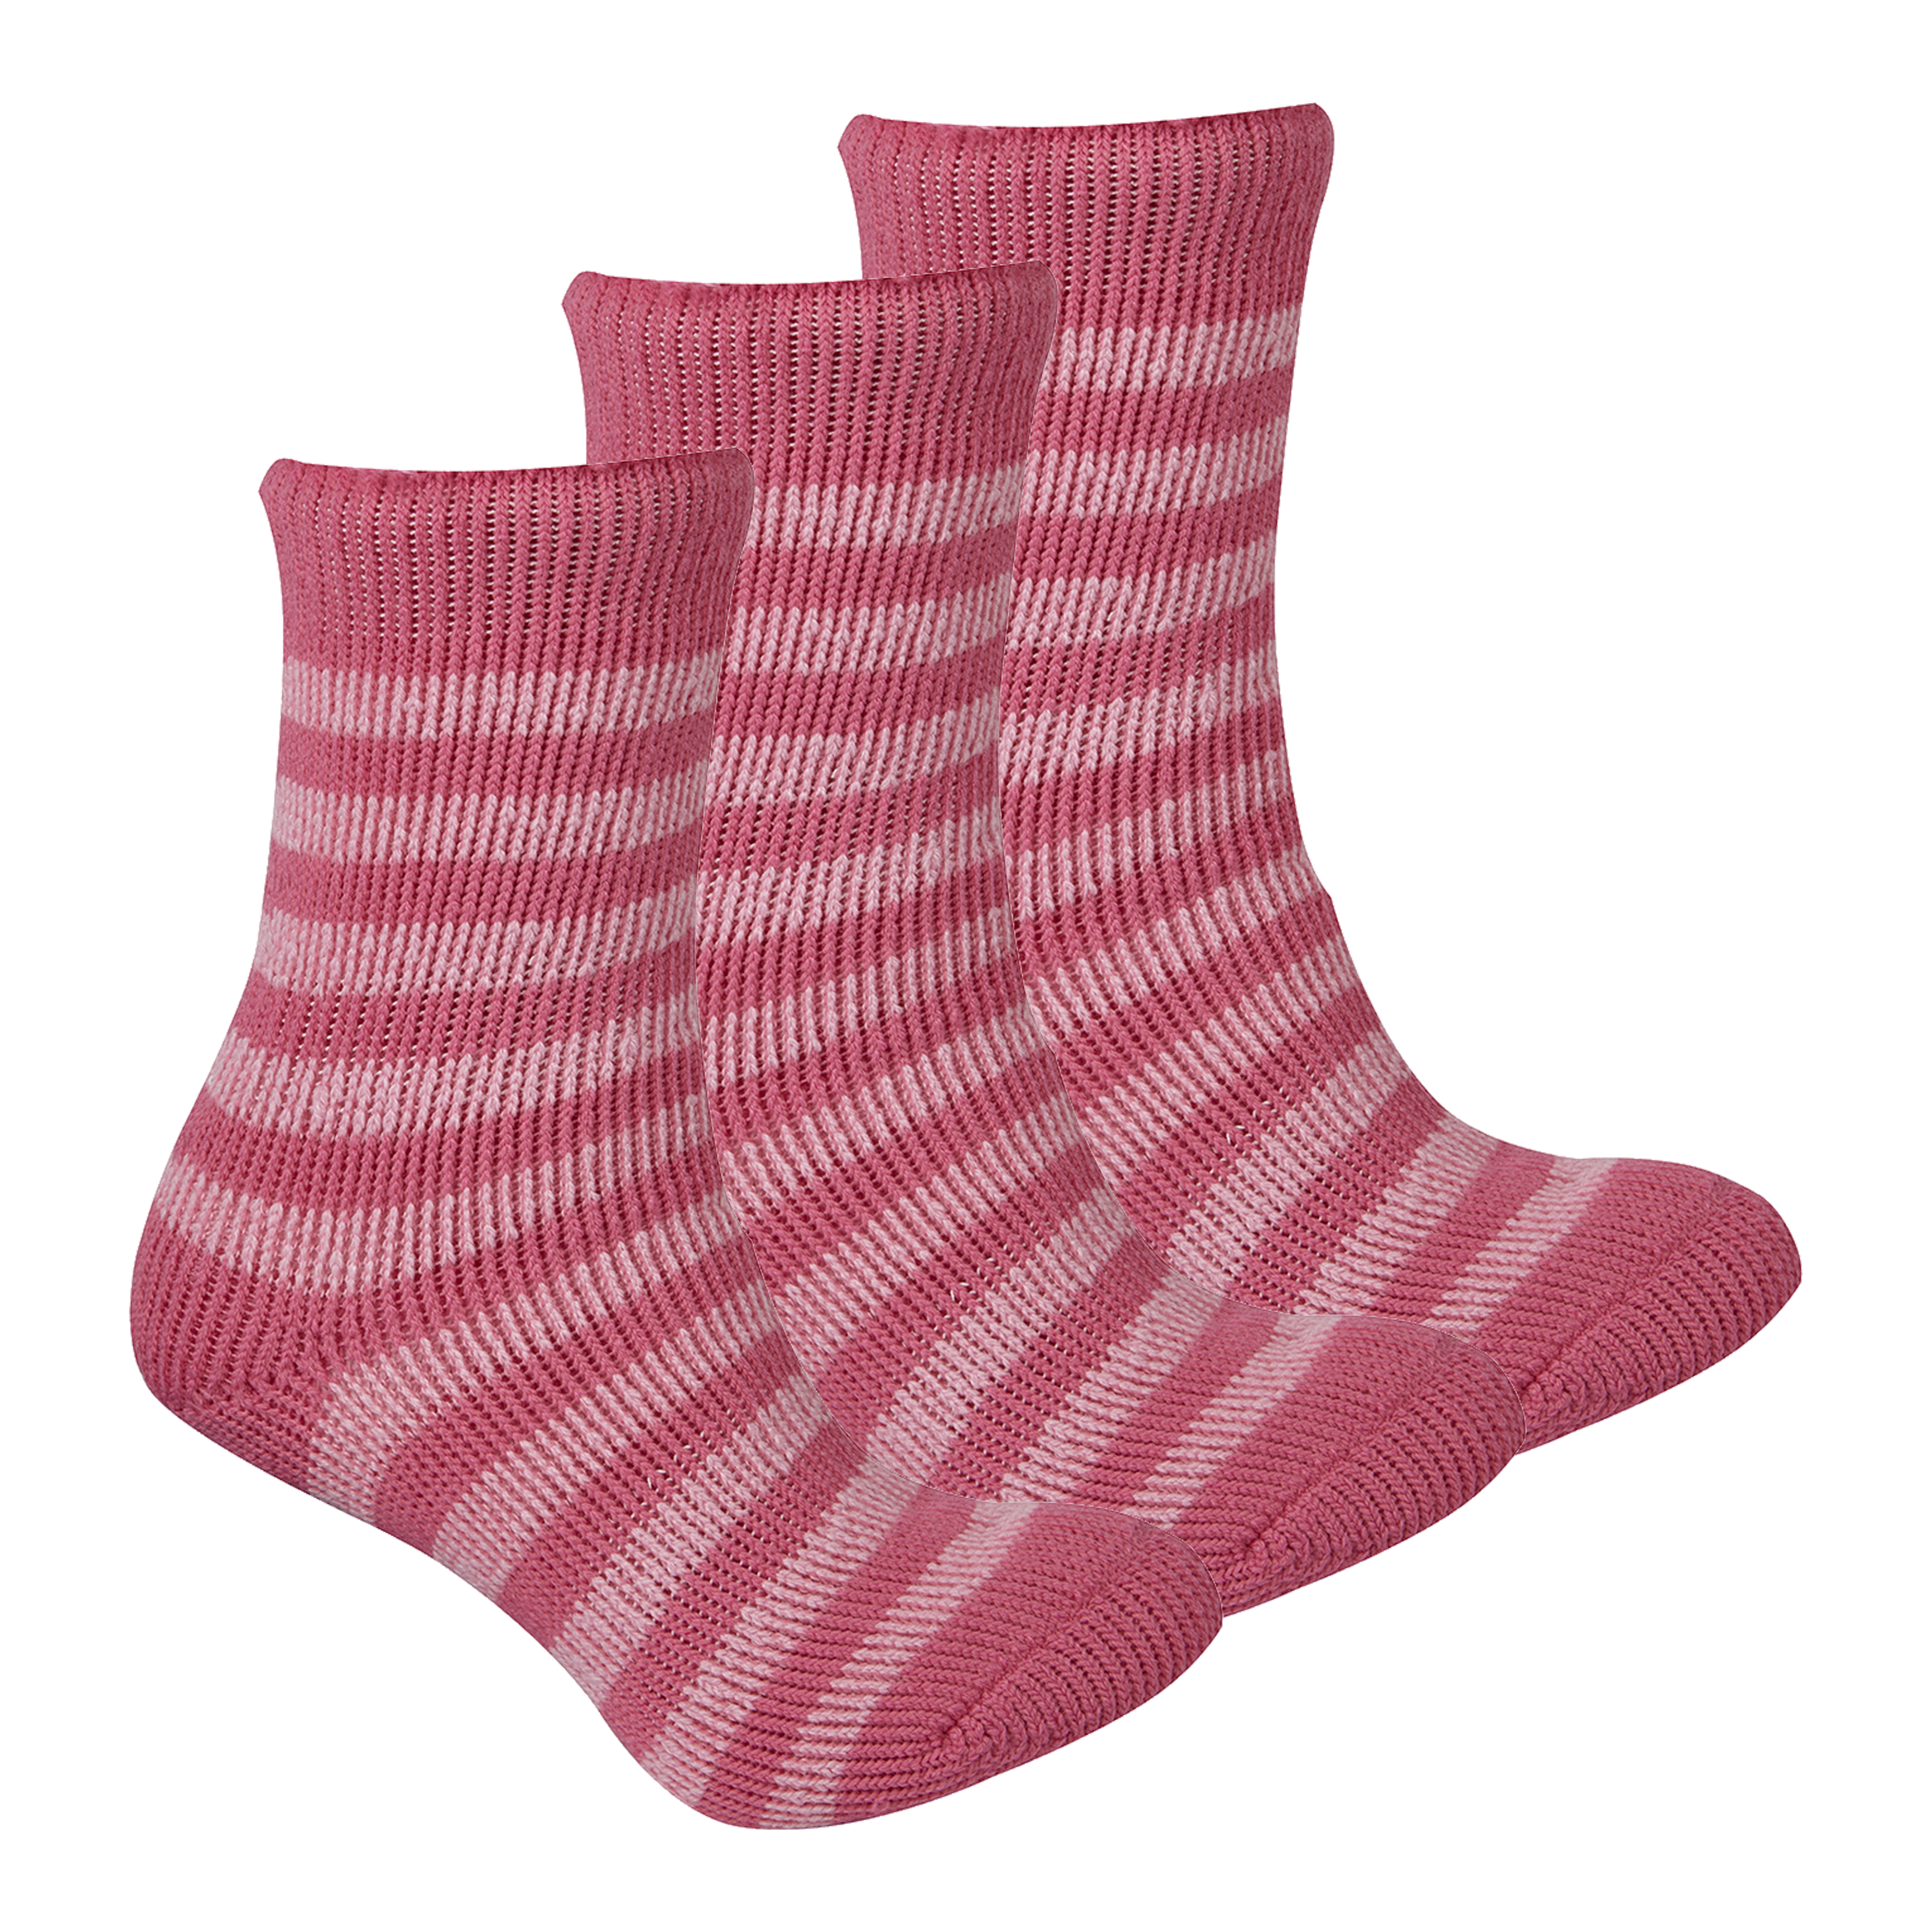 RED TAG Childrens Kids Girls Extreme Thermal Socks Striped W/ Grippers TOG 2.45 